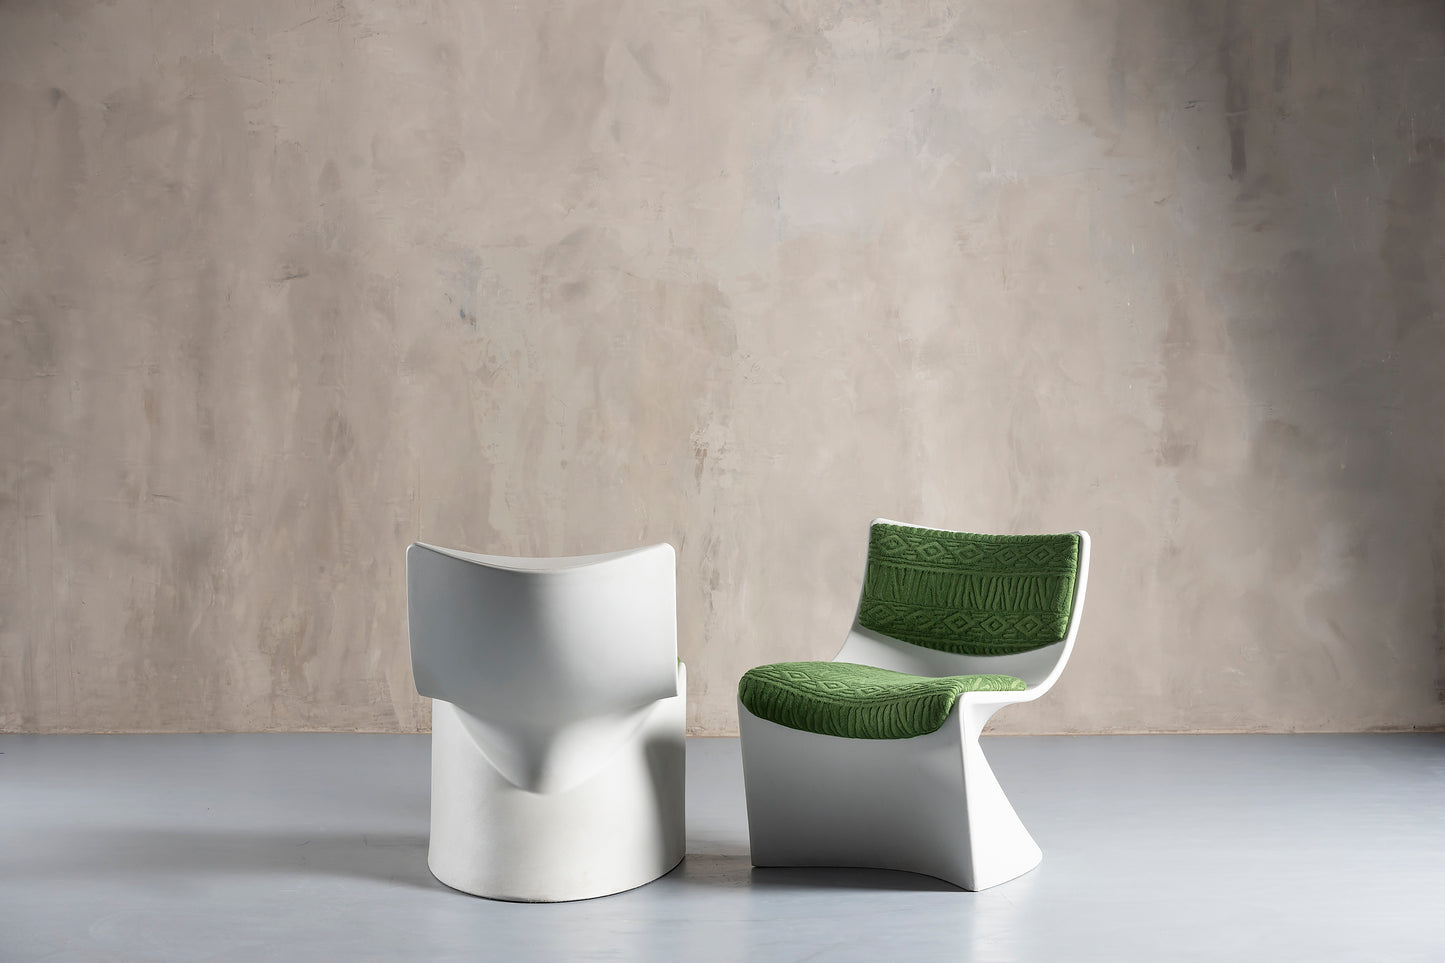 white and green space design chair from other angles